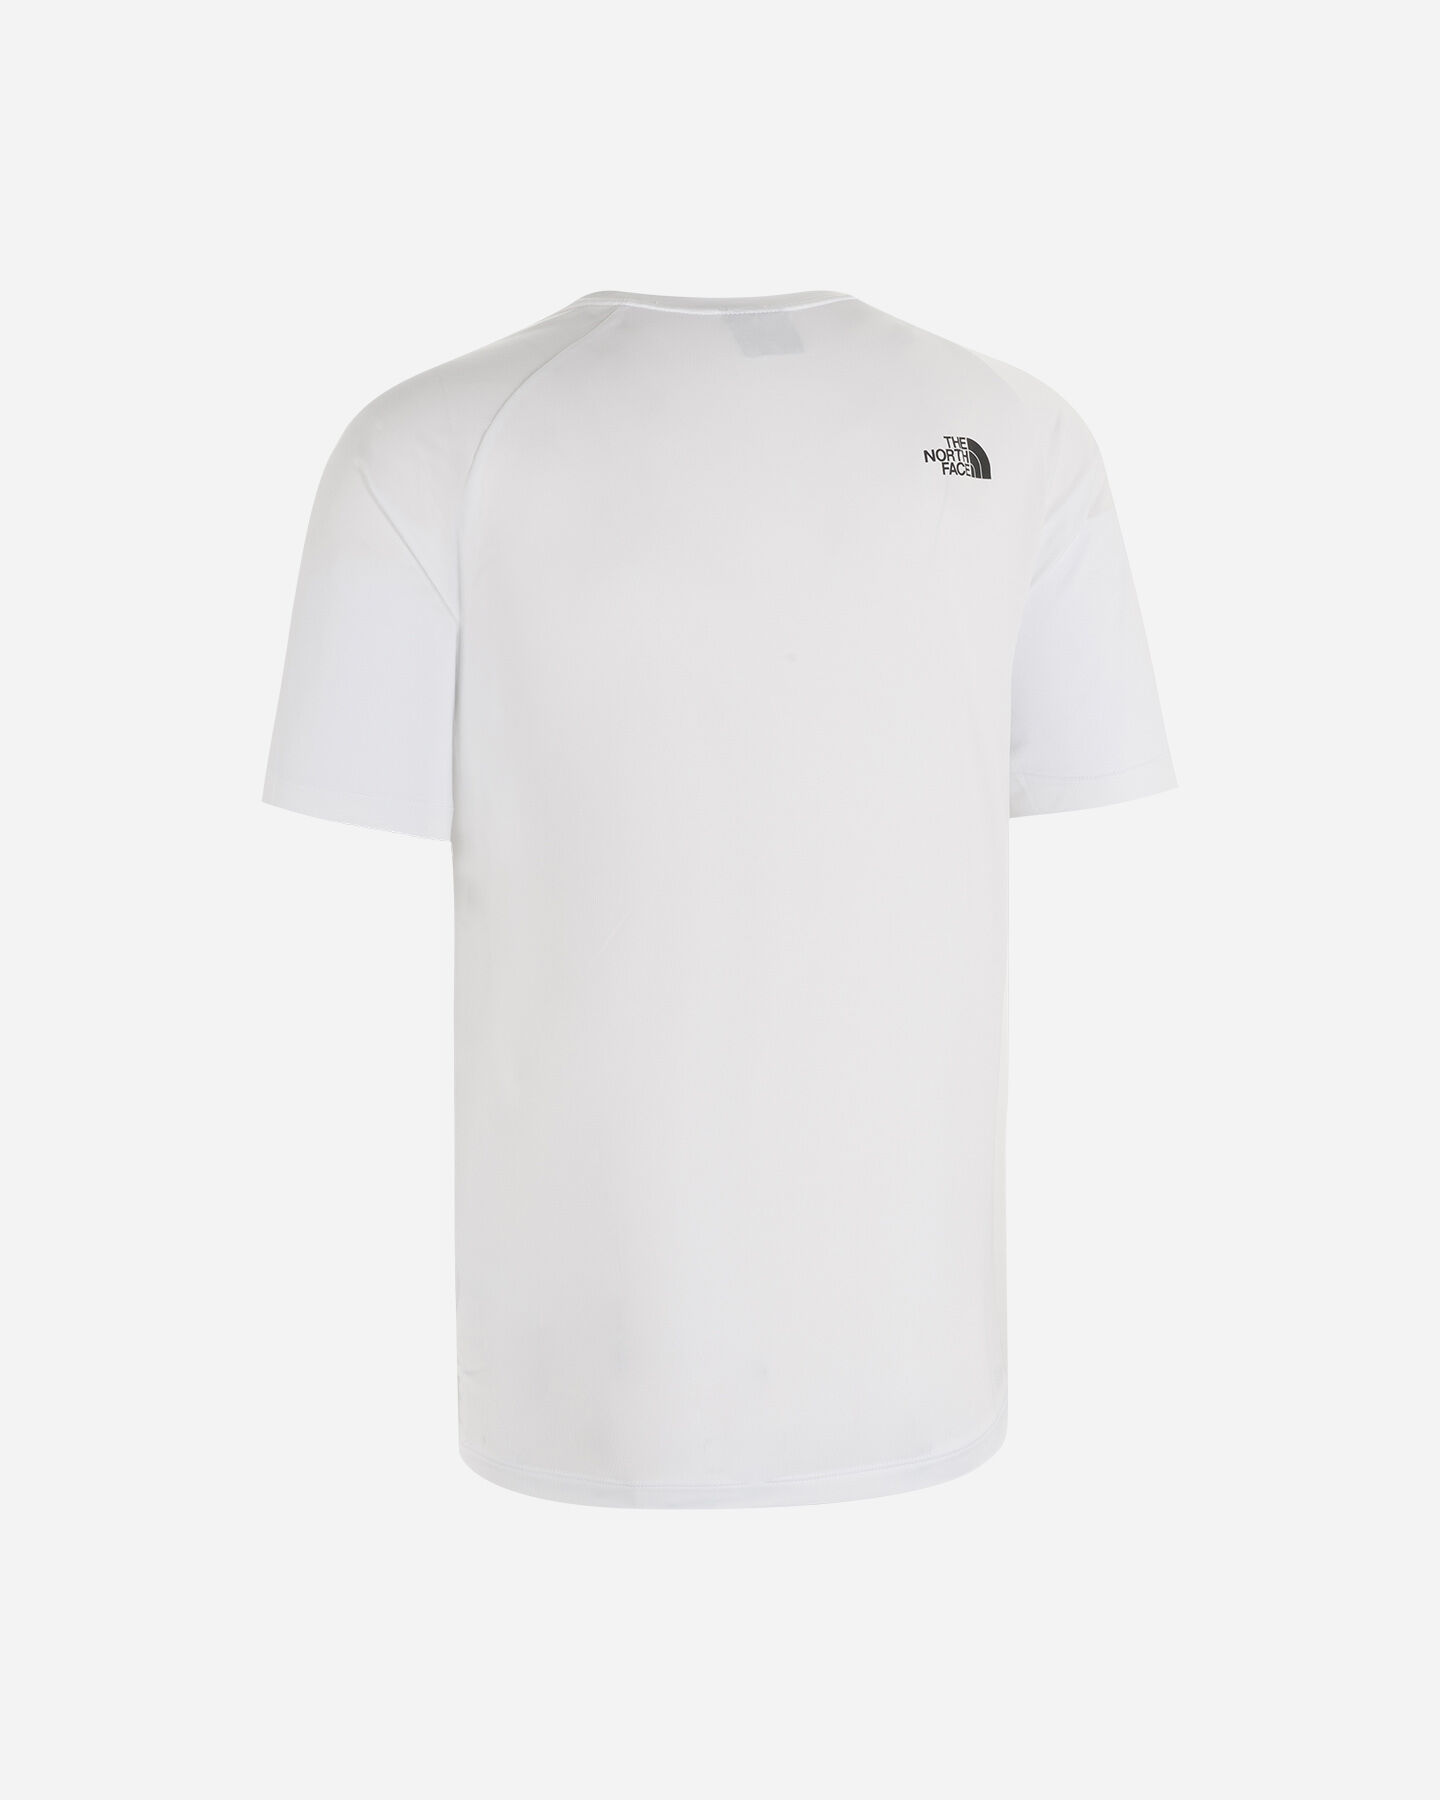  T-Shirt THE NORTH FACE ODLES TECH M S5430742|50D|S scatto 1